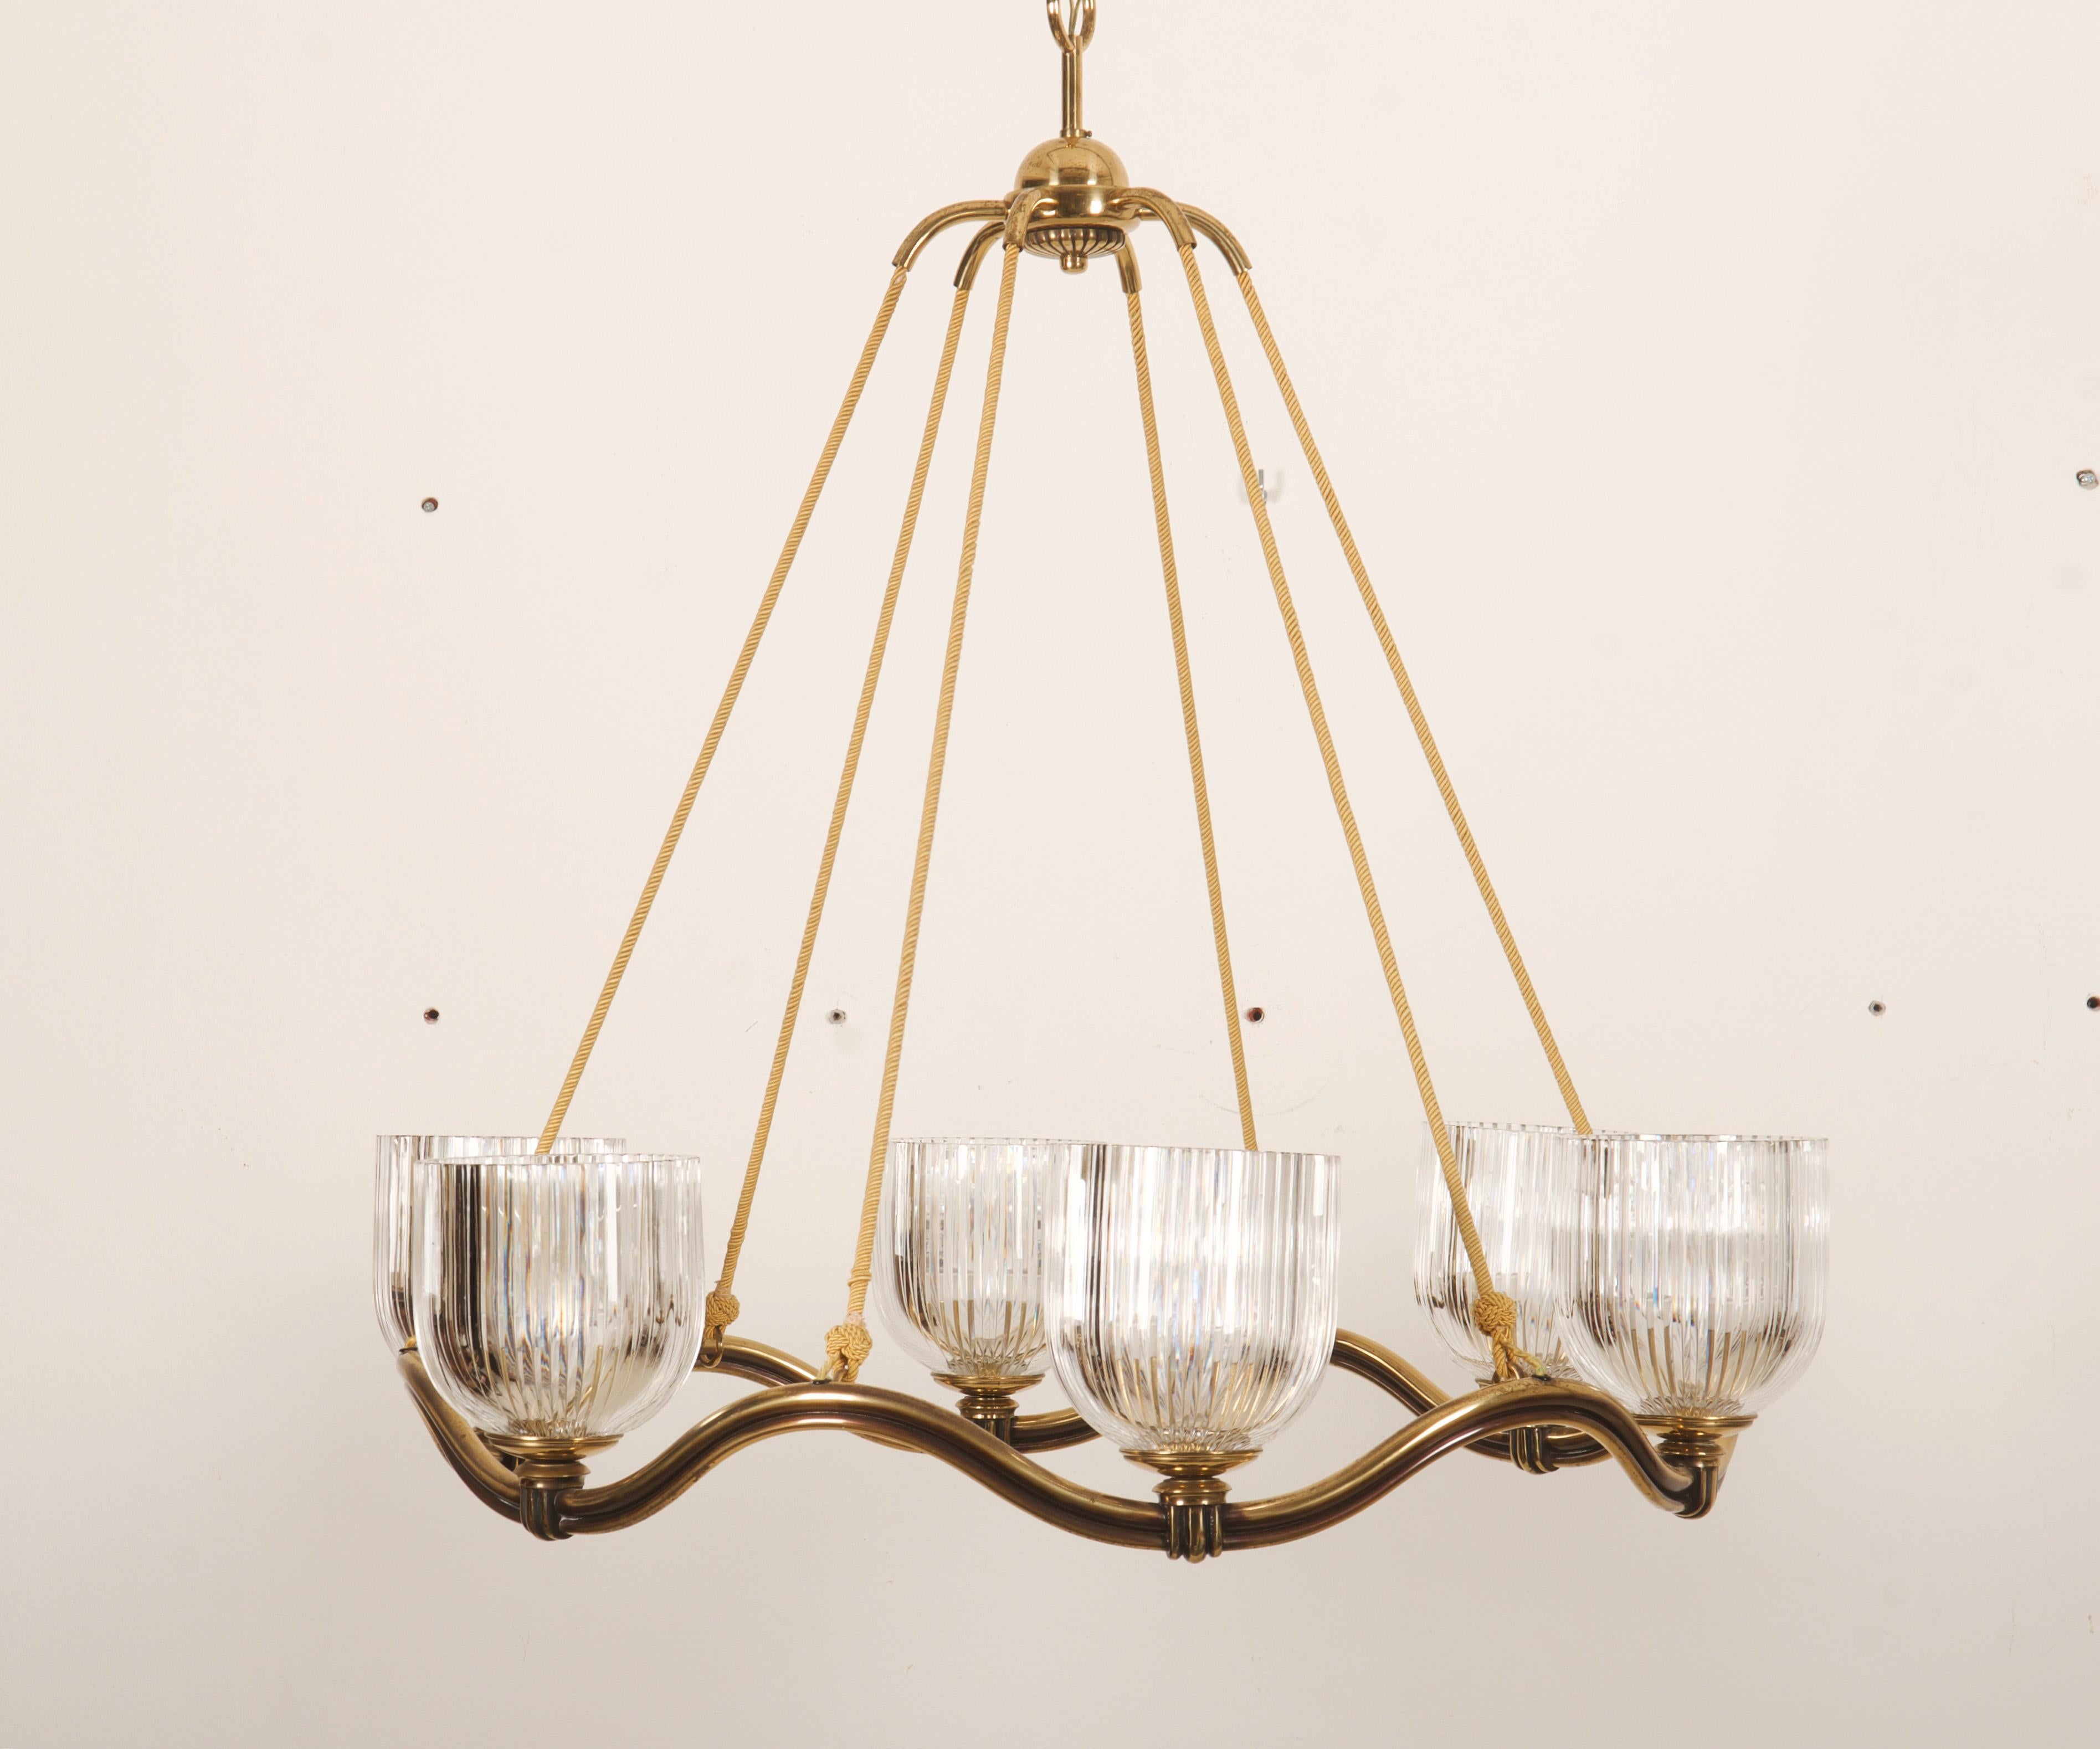 Brass wave-ring form fitted with six E27 sockets and hand blown and hand grinded crystal glass shades originally desigend by Otto Prutscher for Lobmeyr in the 1930s. The chandelier was was designed in the 1930s by Hugo Gorge but this one was made in